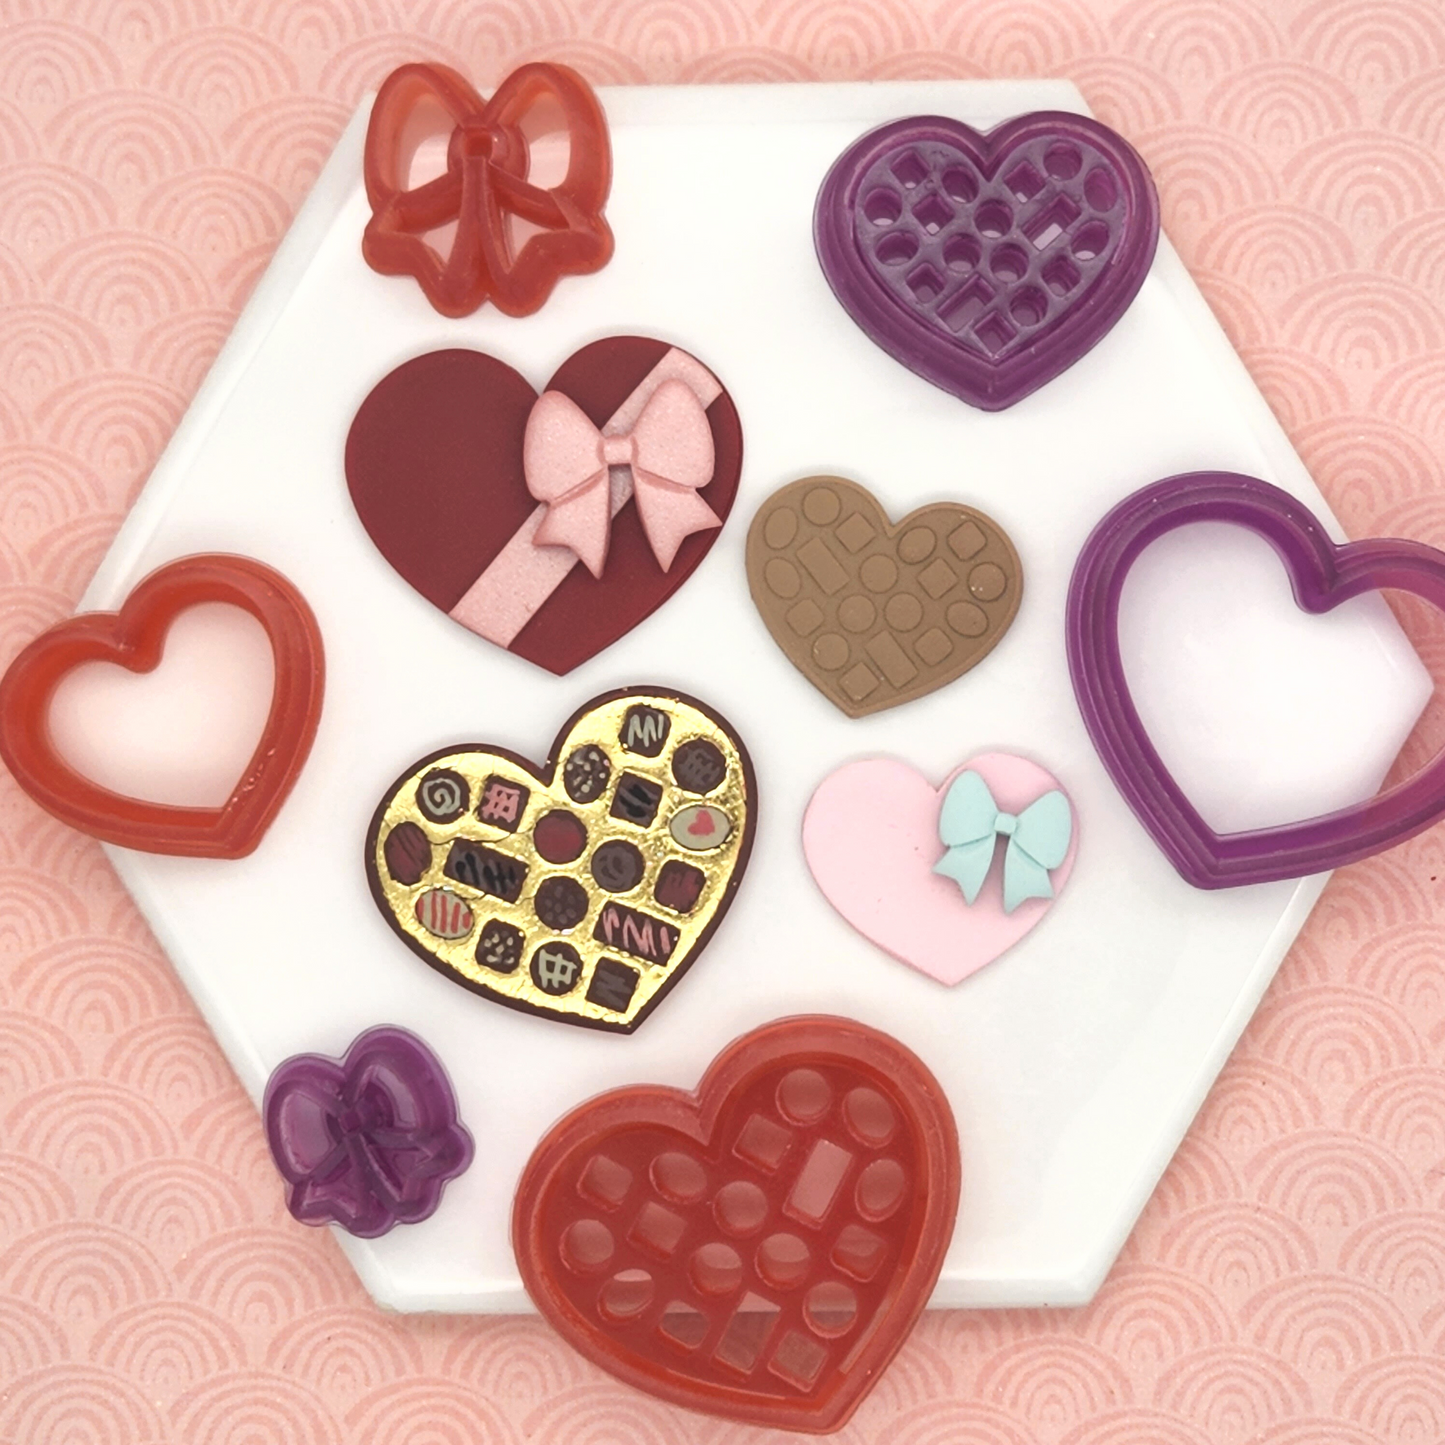 Polymer clay box of chocolates and box of chocolates set includes three cutters, a heart-shaped box of chocolates, a lid for the box, and a bow for the lid